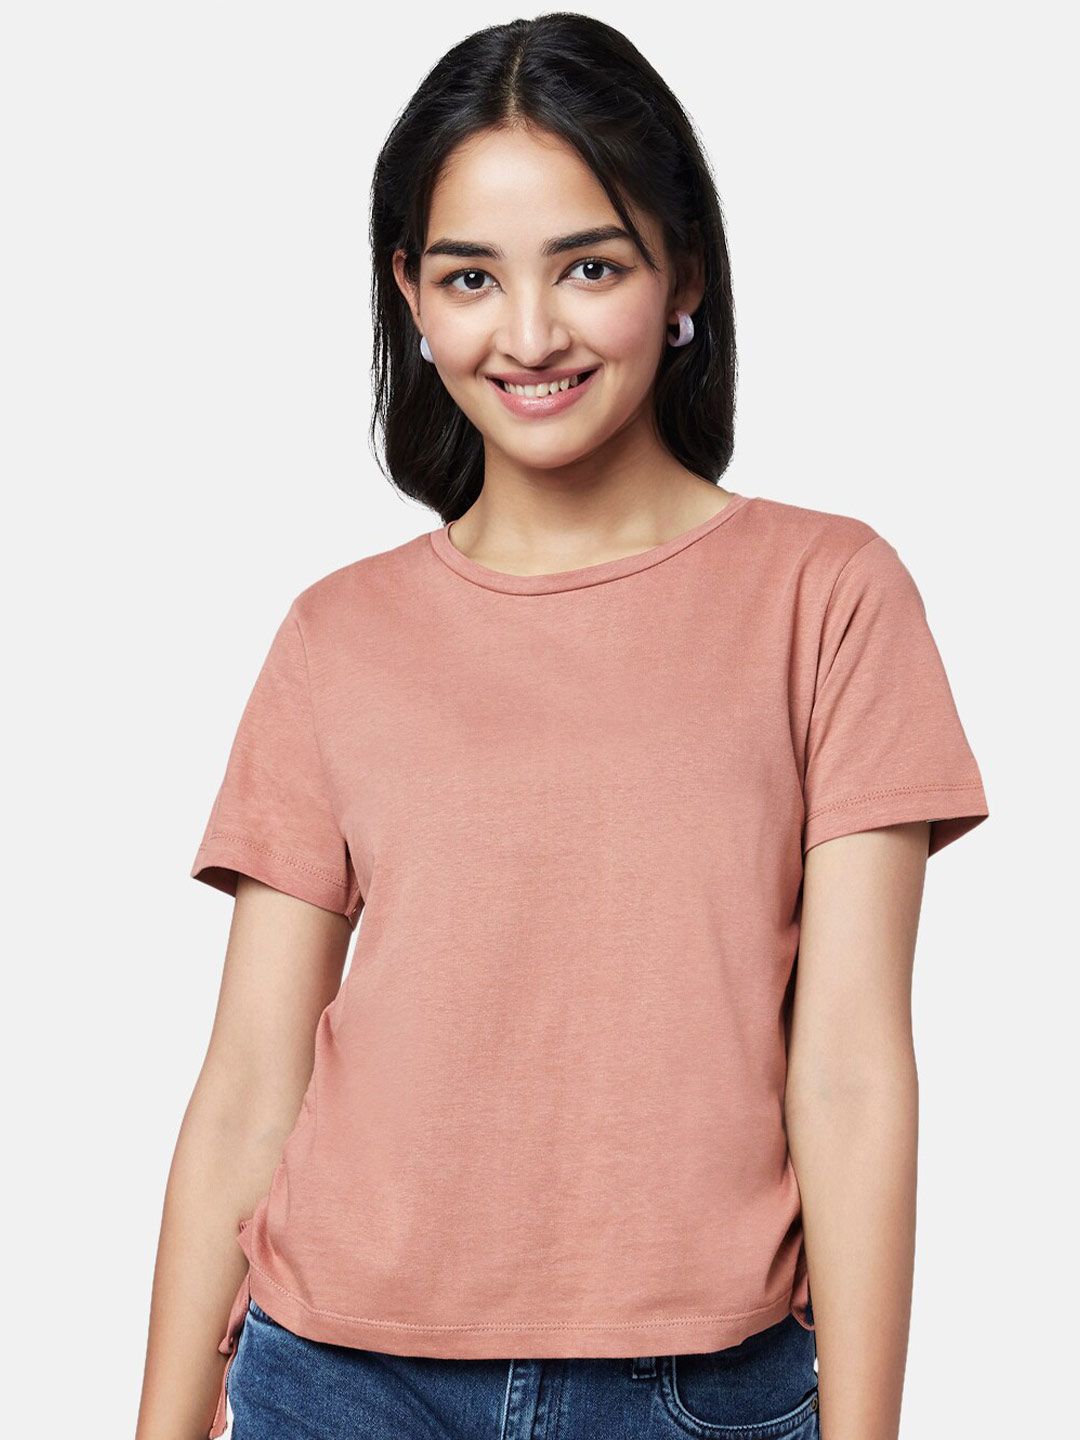 YU by Pantaloons Cotton Round Neck Casual Top Price in India